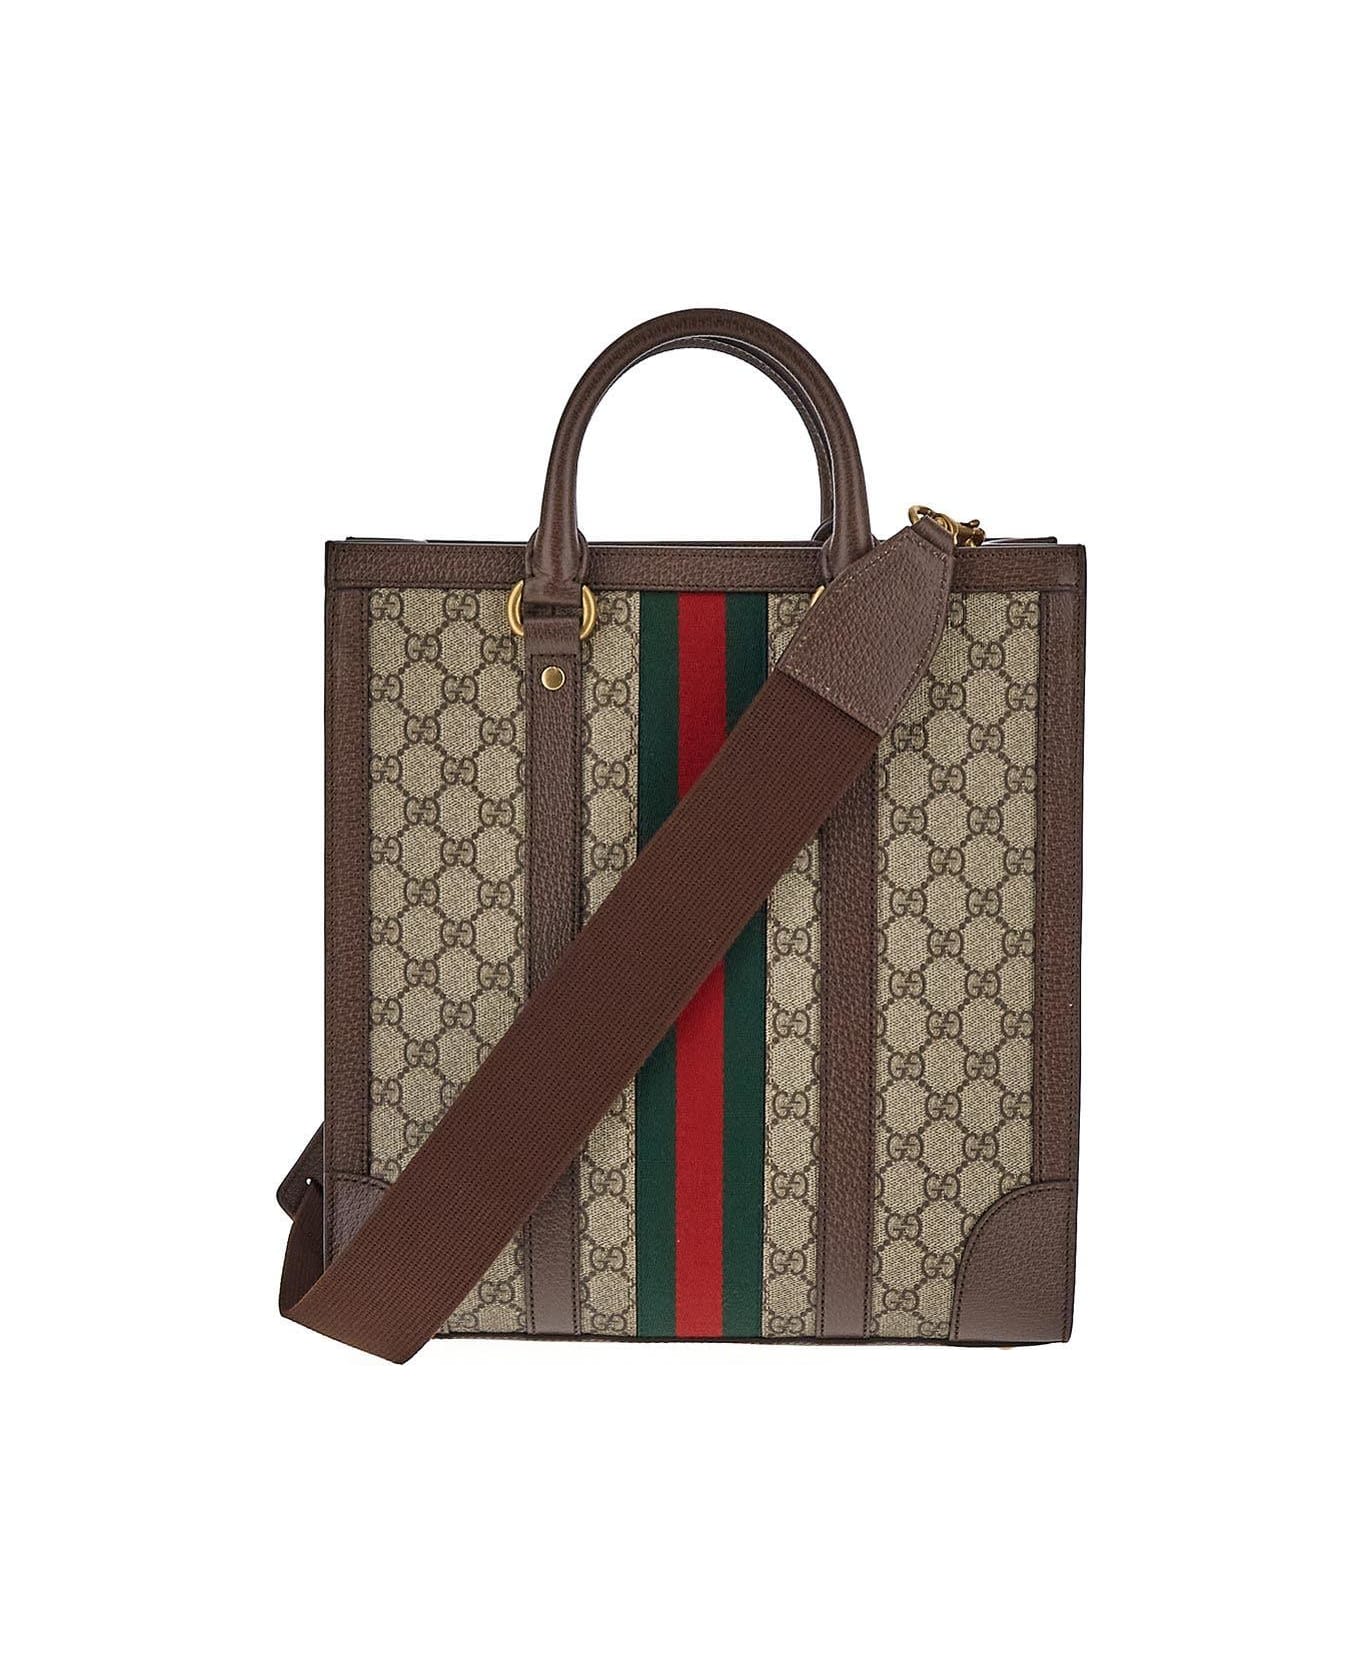 Gucci Ophidia Tote Bag - Acero トートバッグ